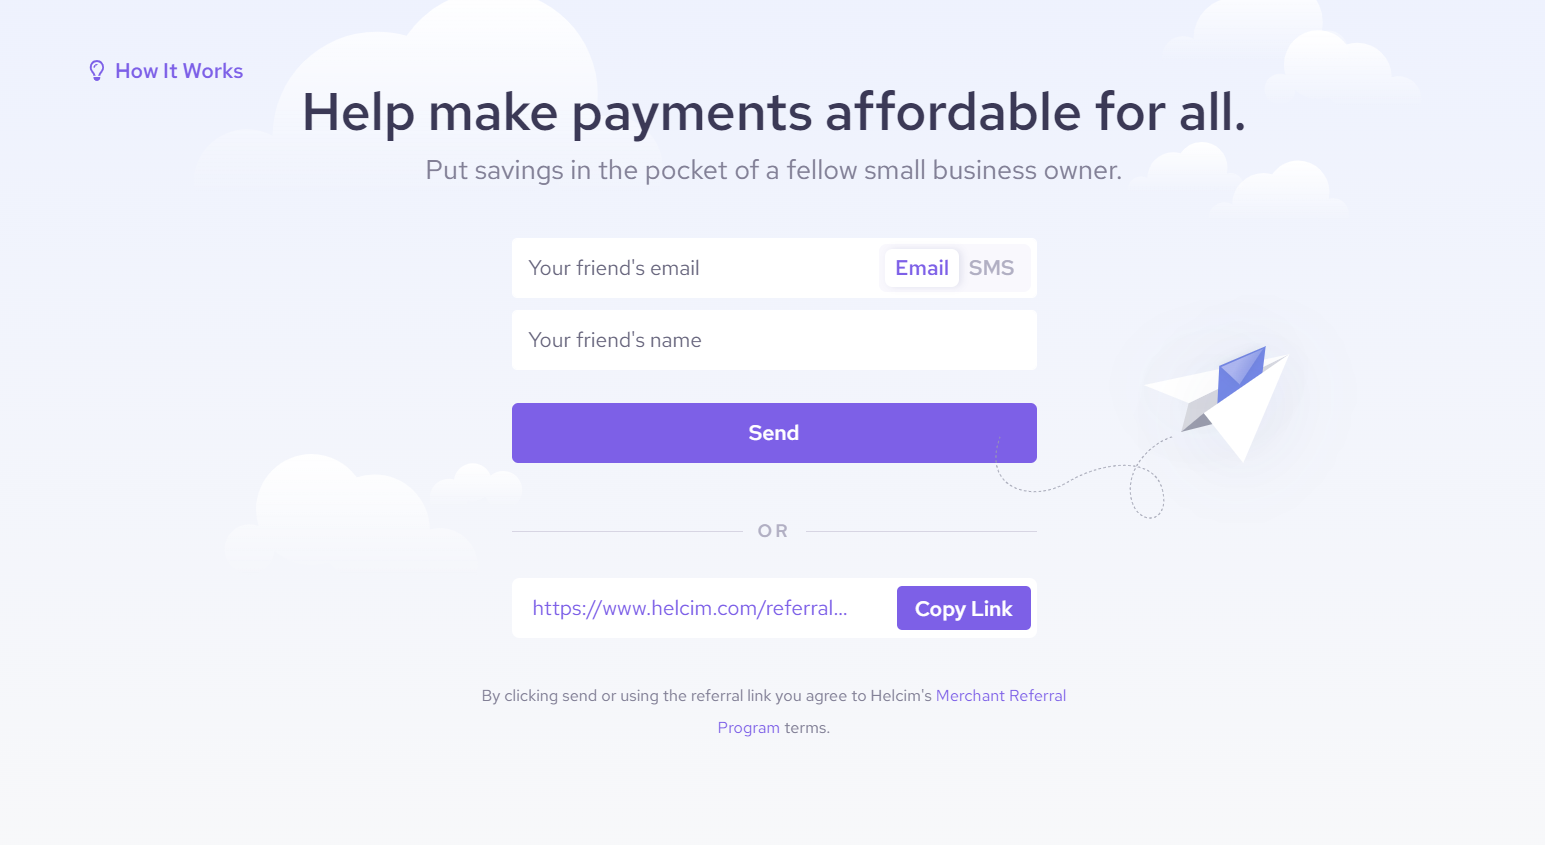 Help make payments affordable for all